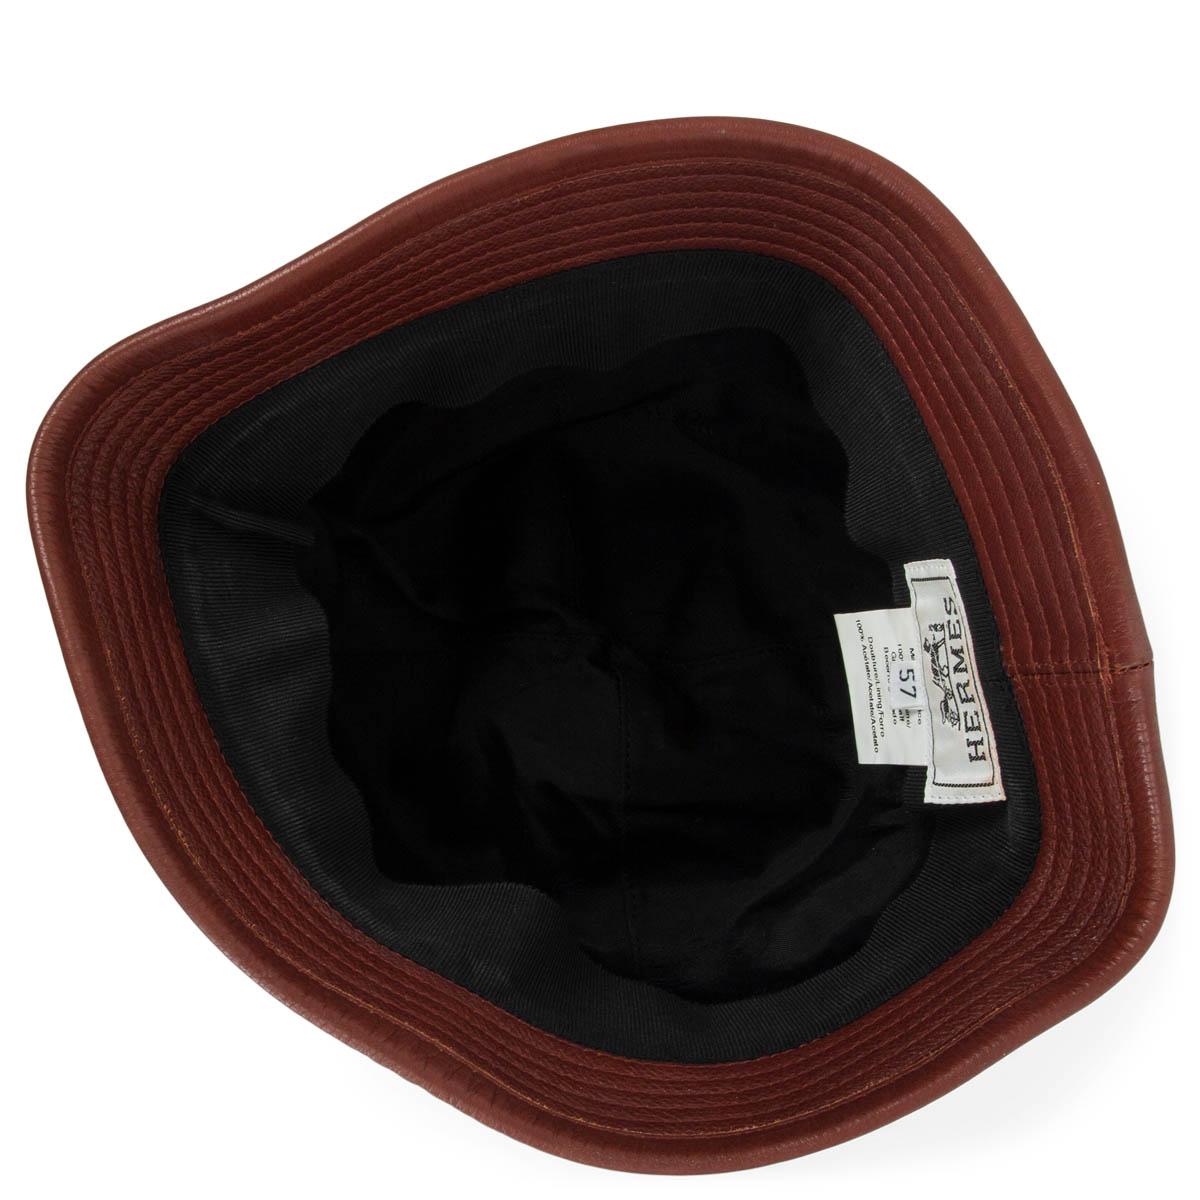 HERMES Sienne chestnut brown grained leather Bucket Hat 57 In Good Condition For Sale In Zürich, CH